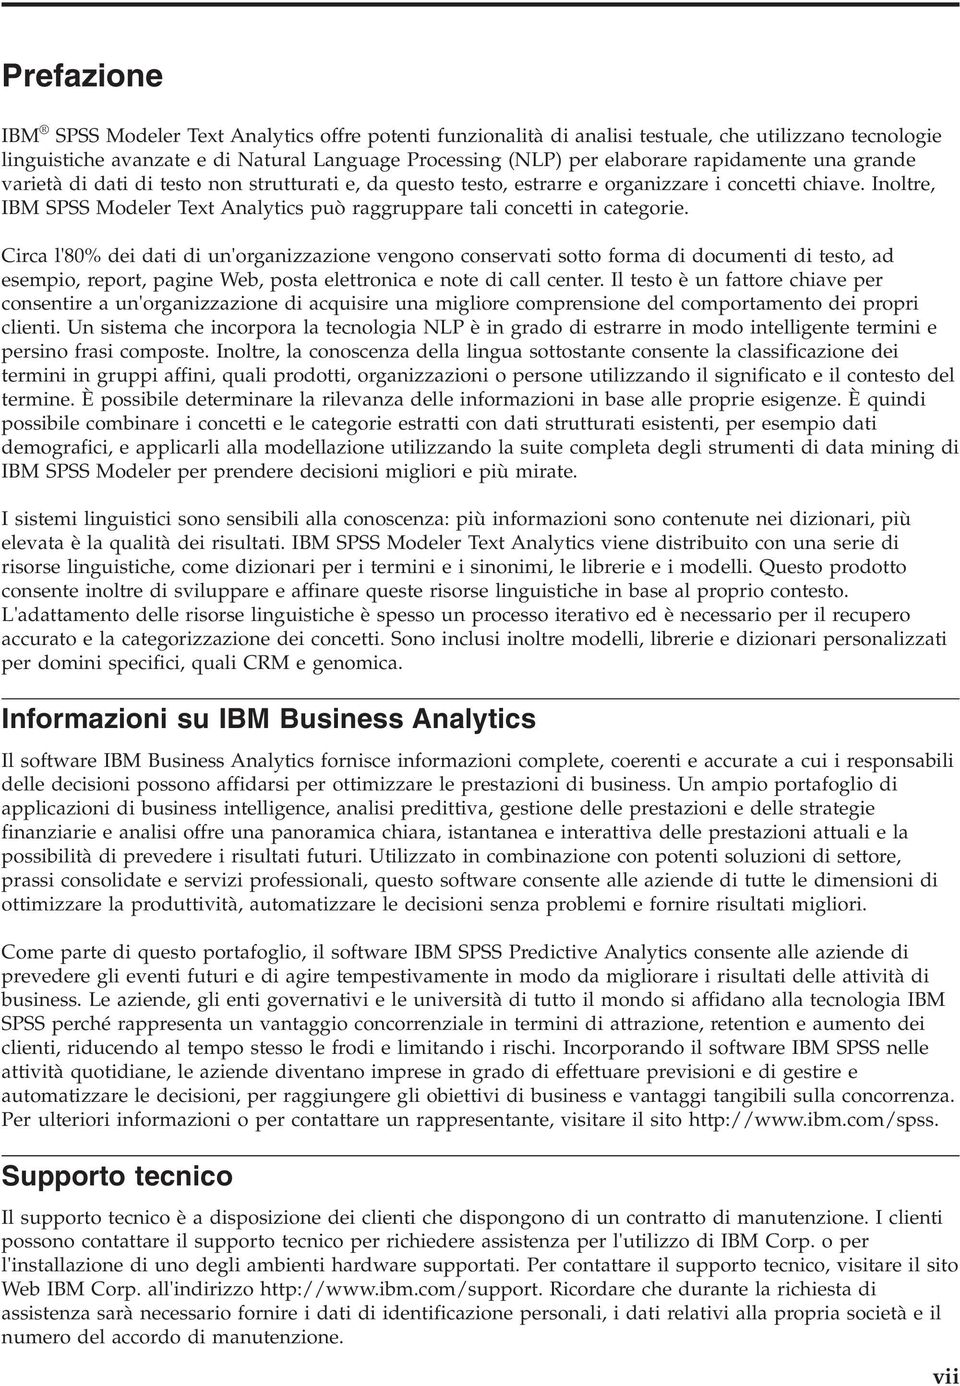 Inoltre, IBM SPSS Modeler Text Analytics può raggruppare tali concetti in categorie.